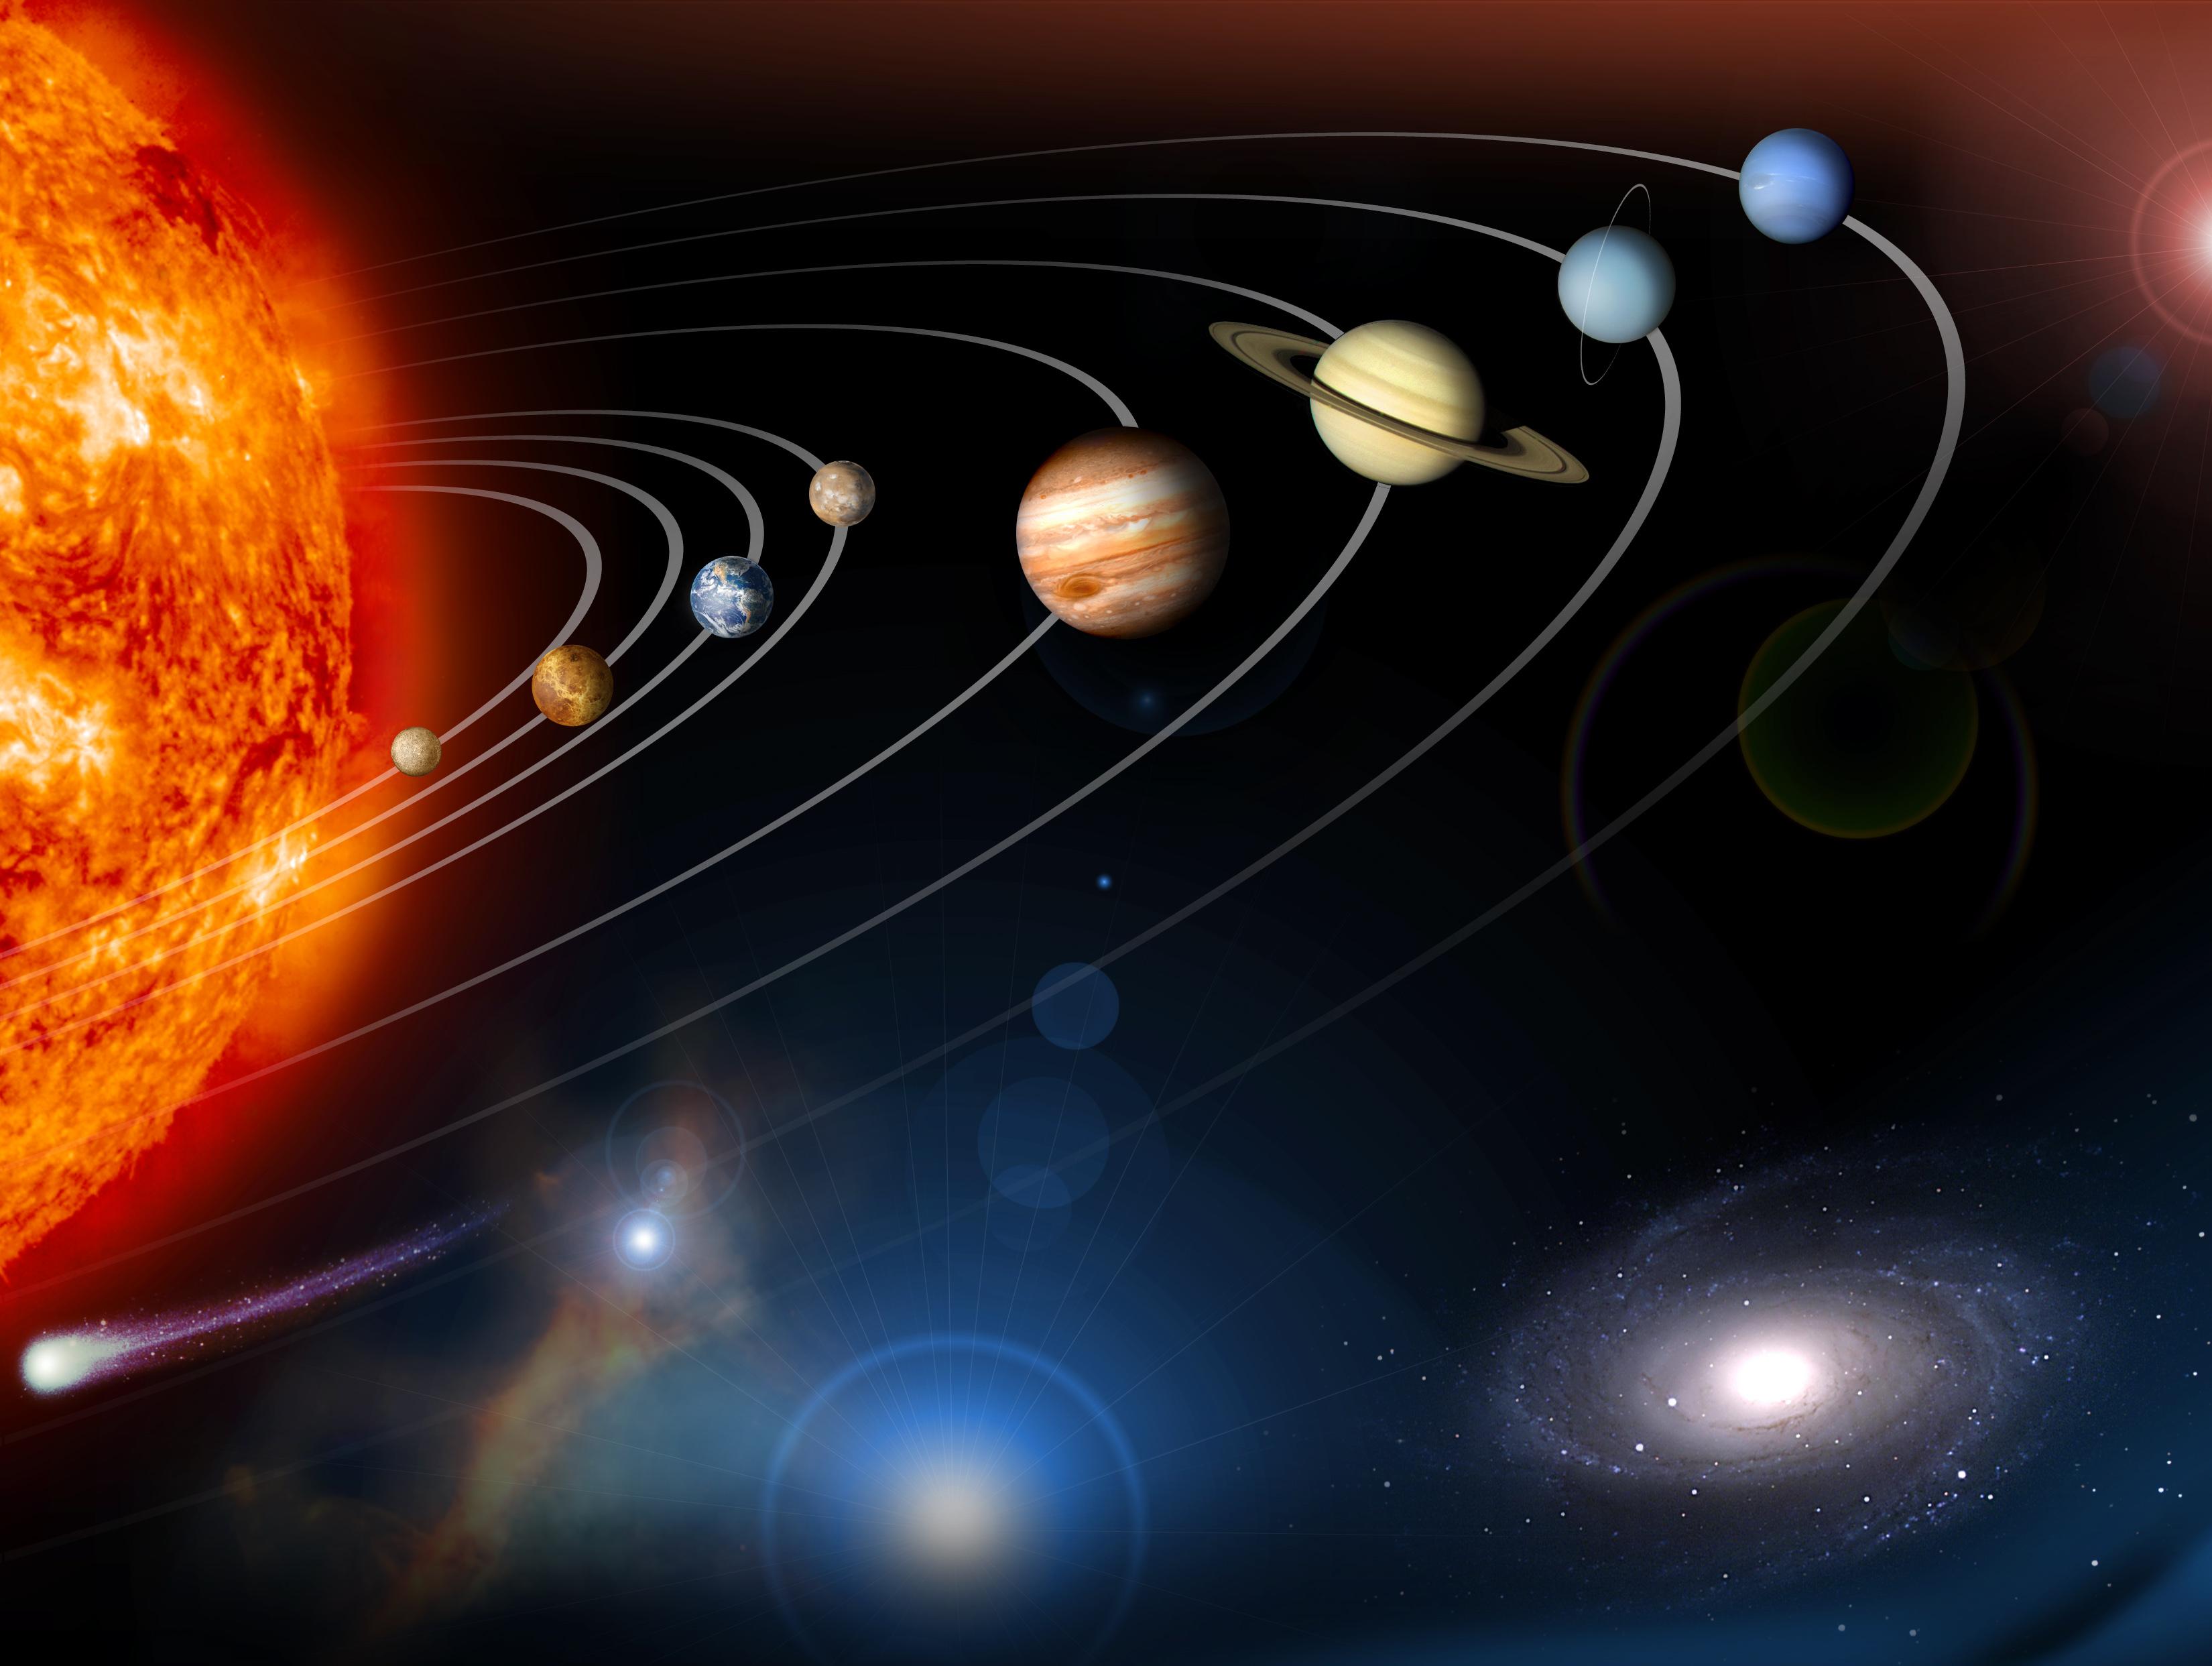 This digital collage contains a highly stylized rendition of our solar system and points beyond.